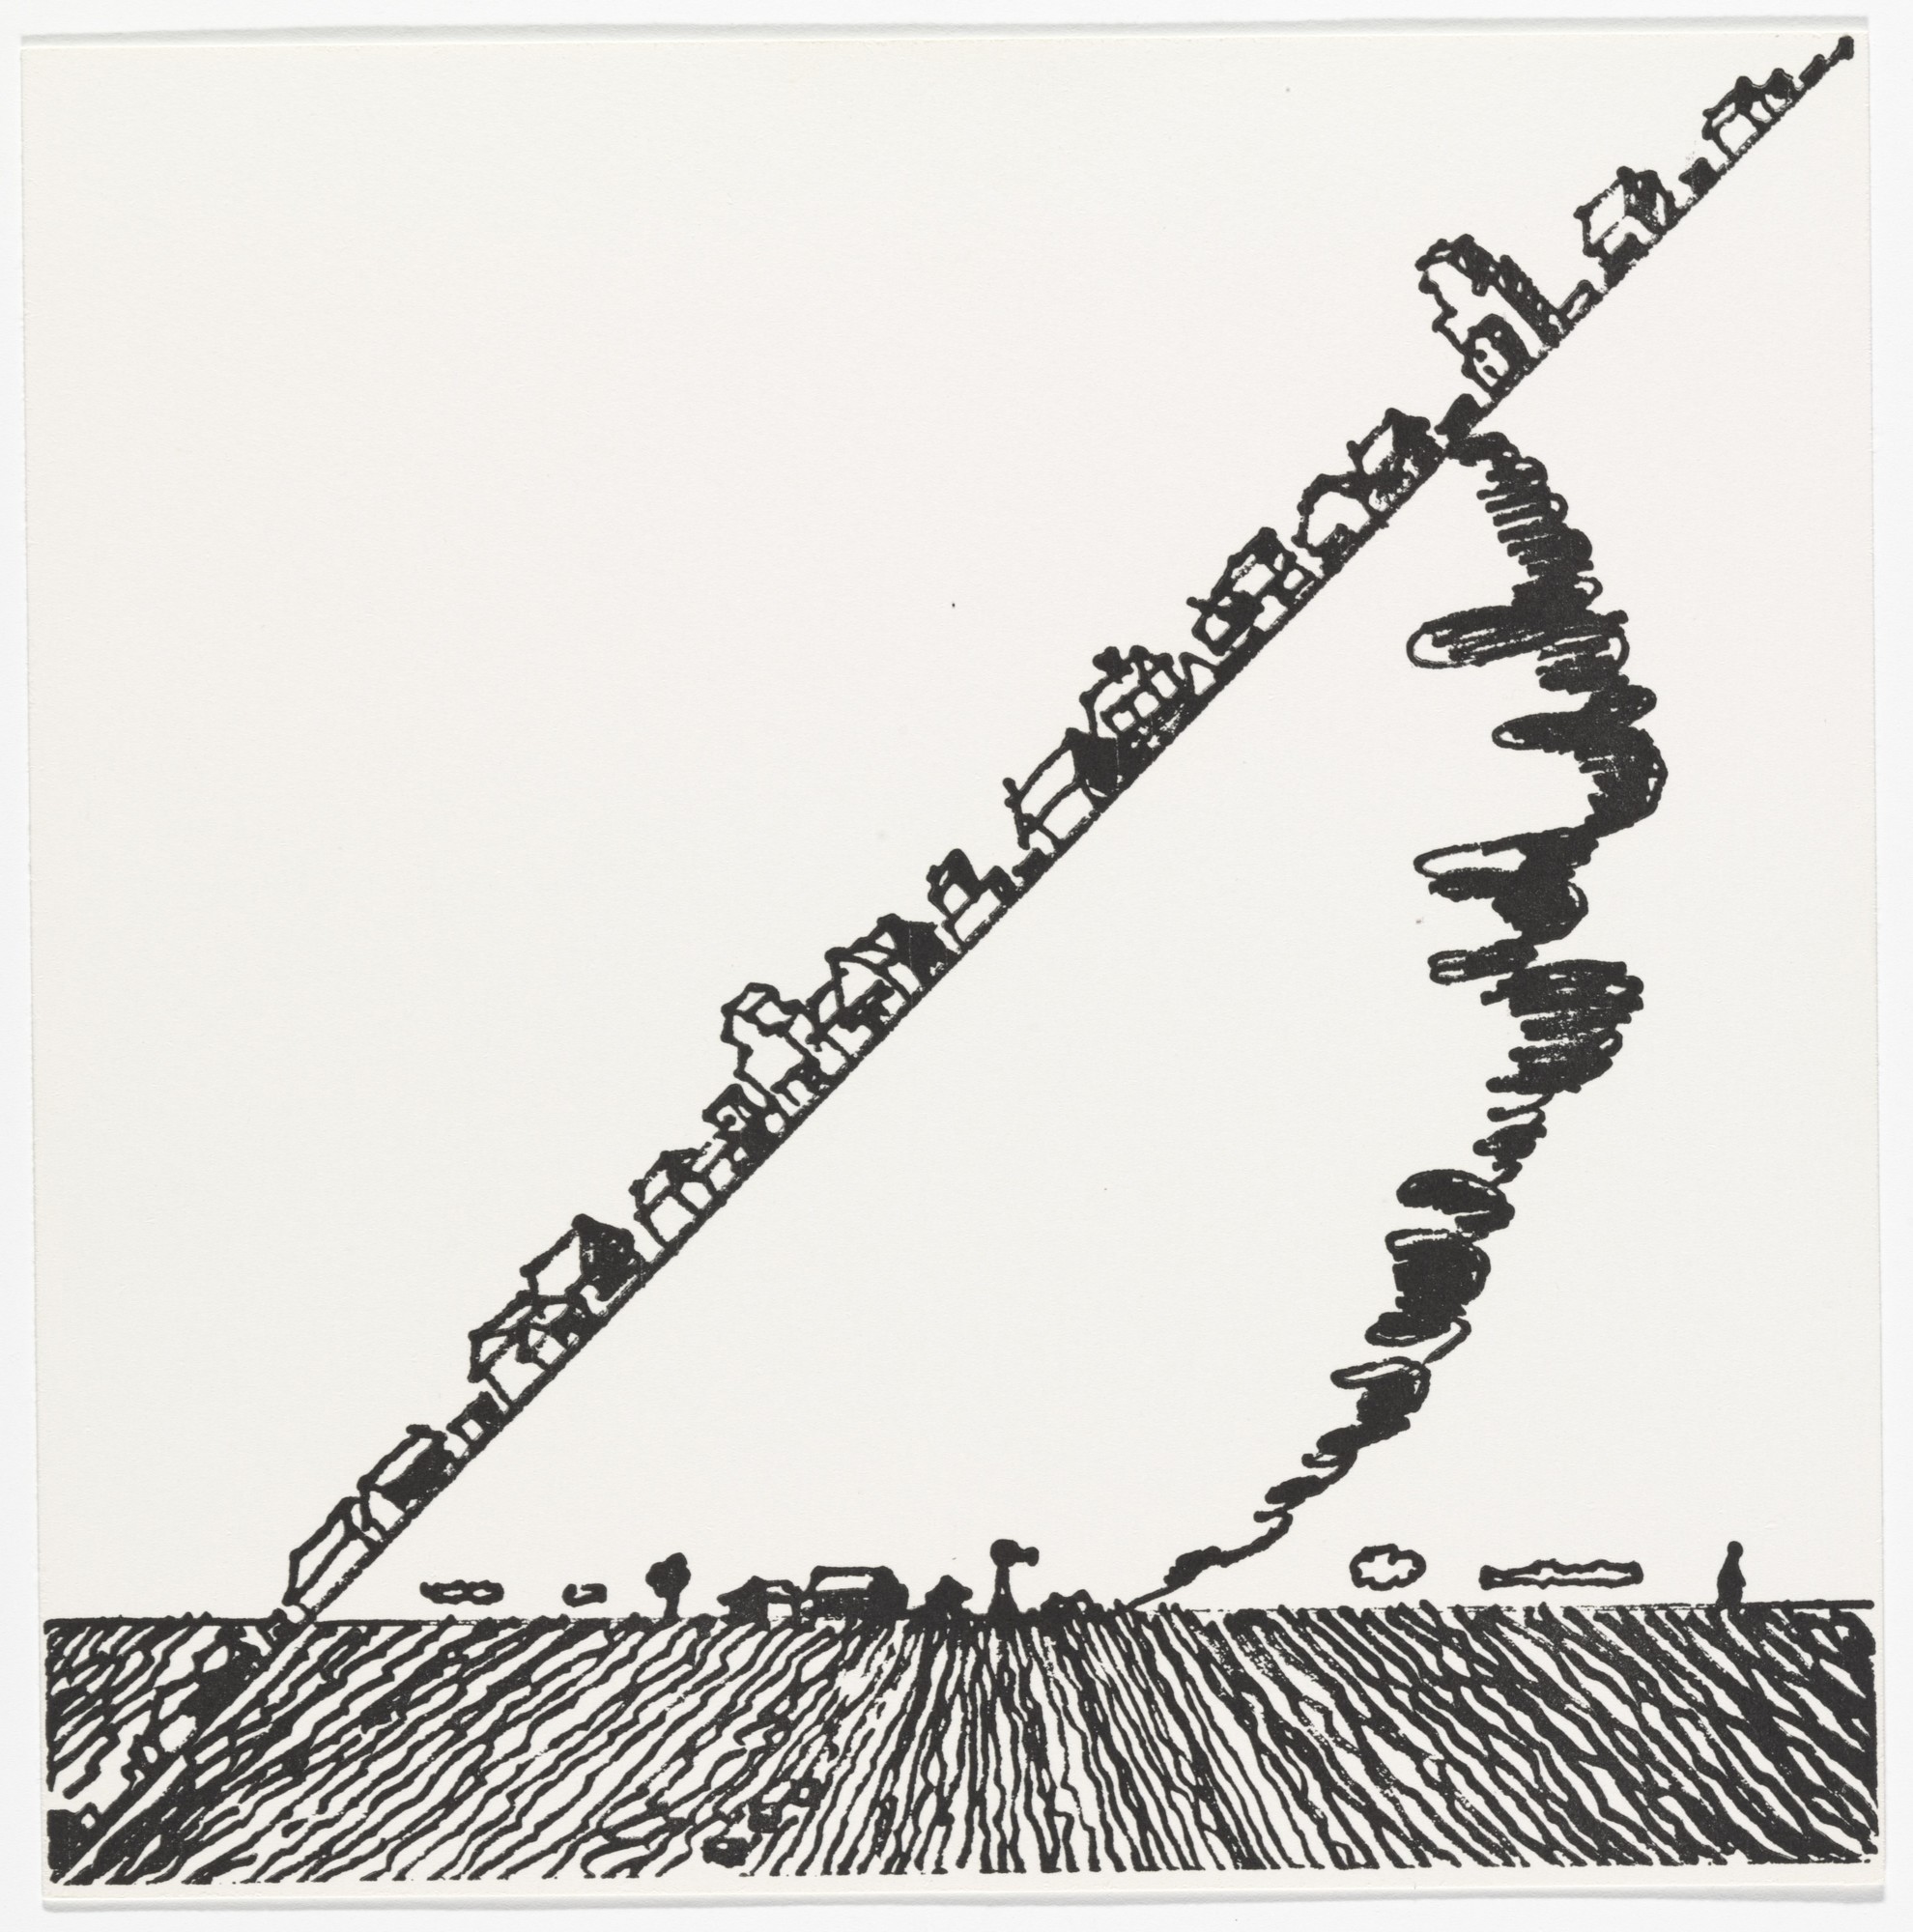 Illustration by Joe Zucker called Relocation of Property by Natural Forces, shows a row of houses climbing toward the sky held up by smoke.